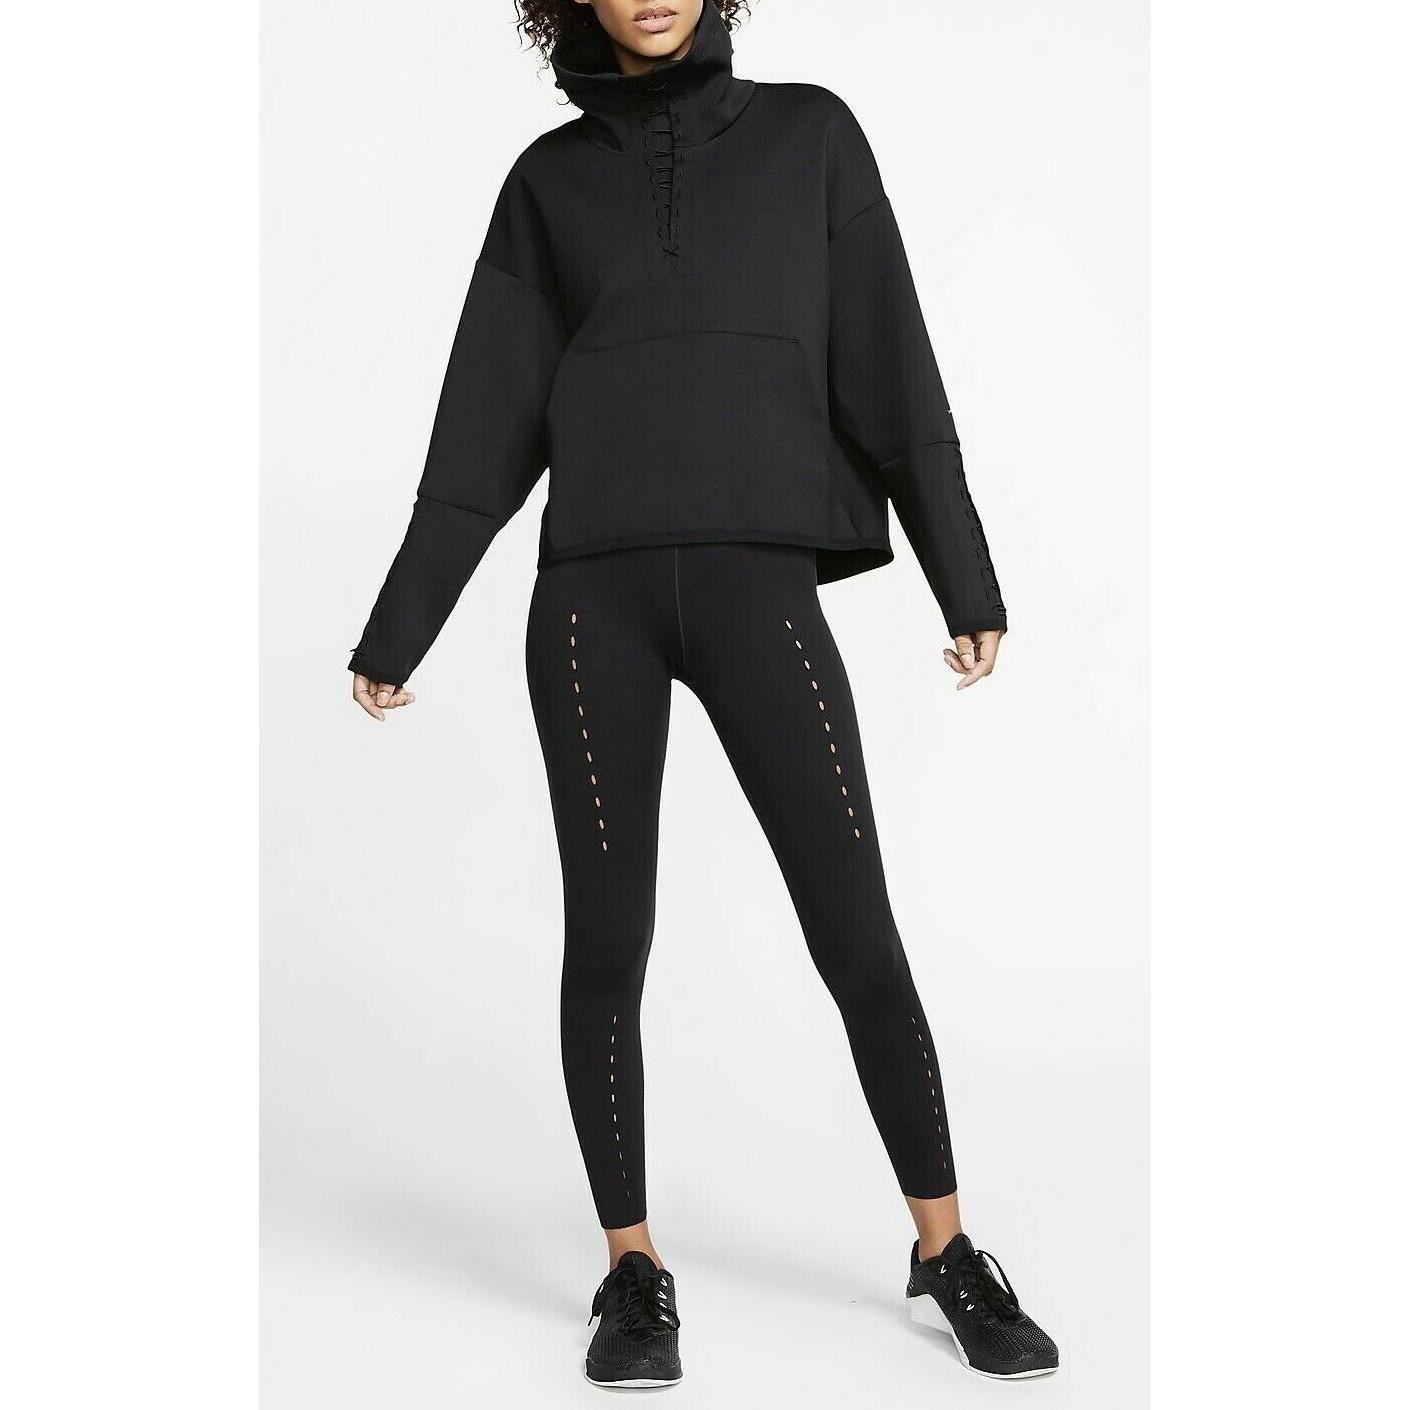 Nike Women s Solid Black Bungee Tech Pac Training Top Pullover